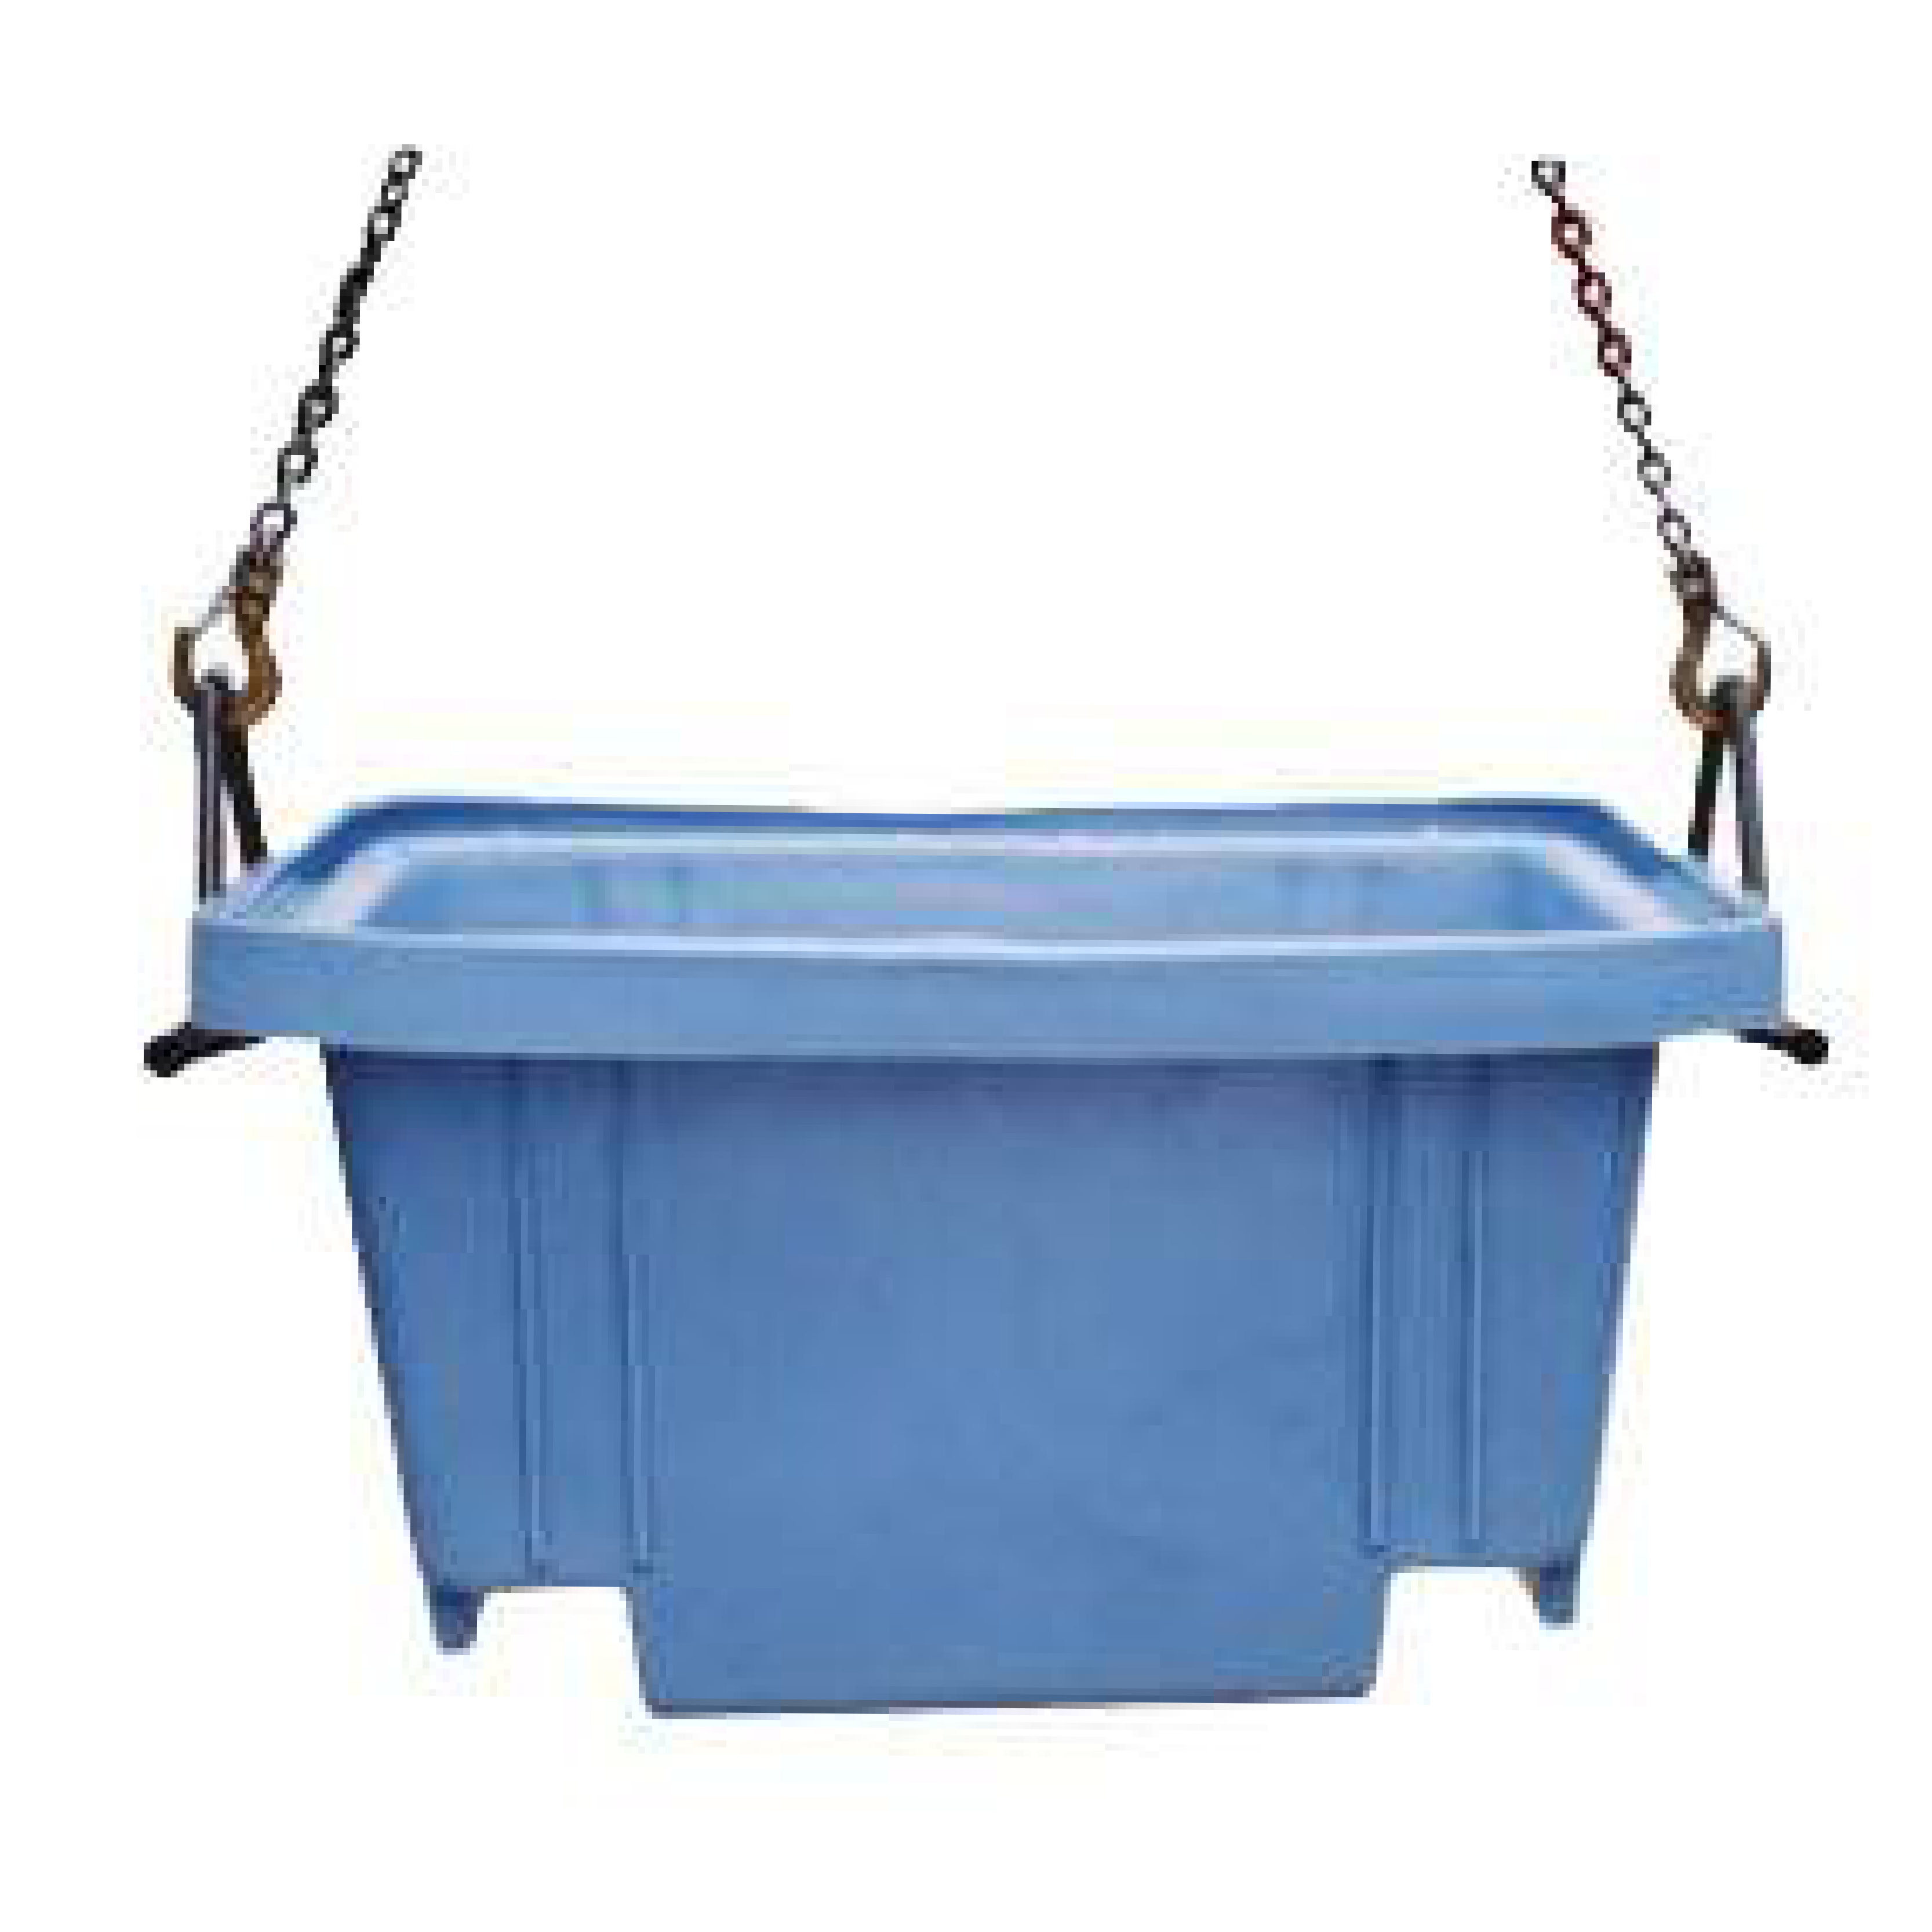 250 Litre Constructo® Universal Mortar Tubs for Crane Or Fork Lifting